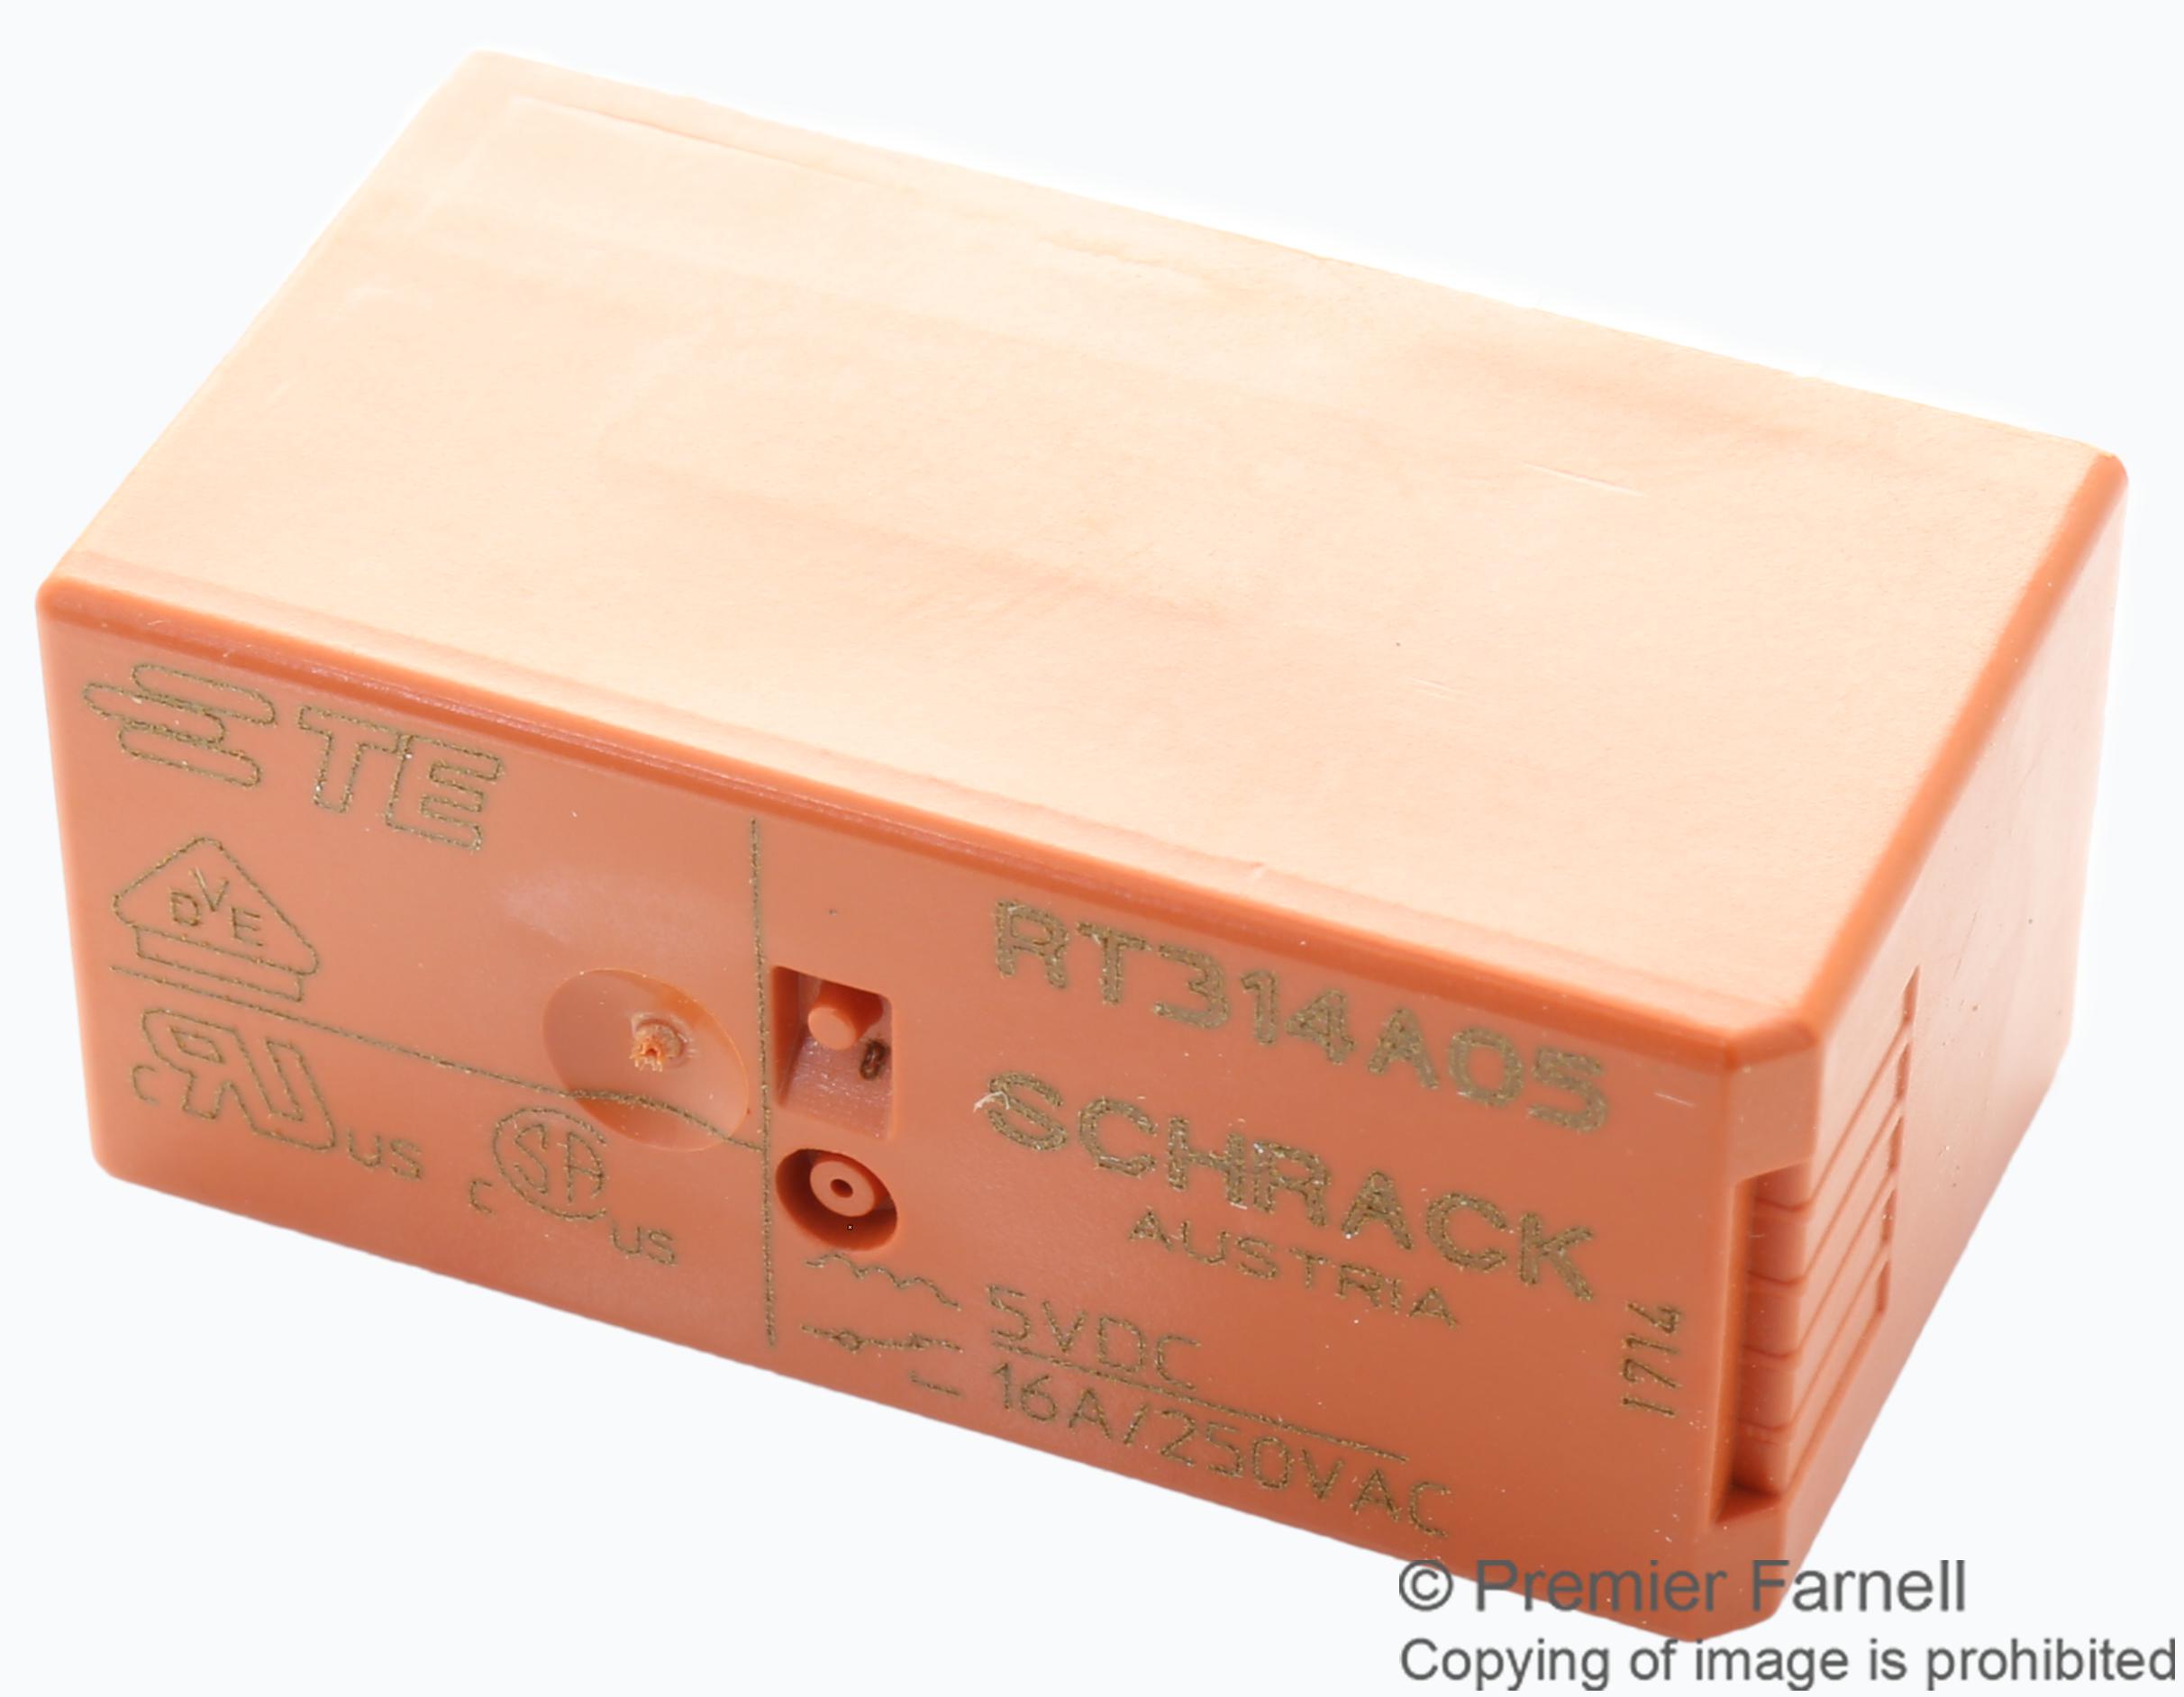 RTB14005 POWER RELAY, SPDT, 12A, 250V, TH SCHRACK - TE CONNECTIVITY